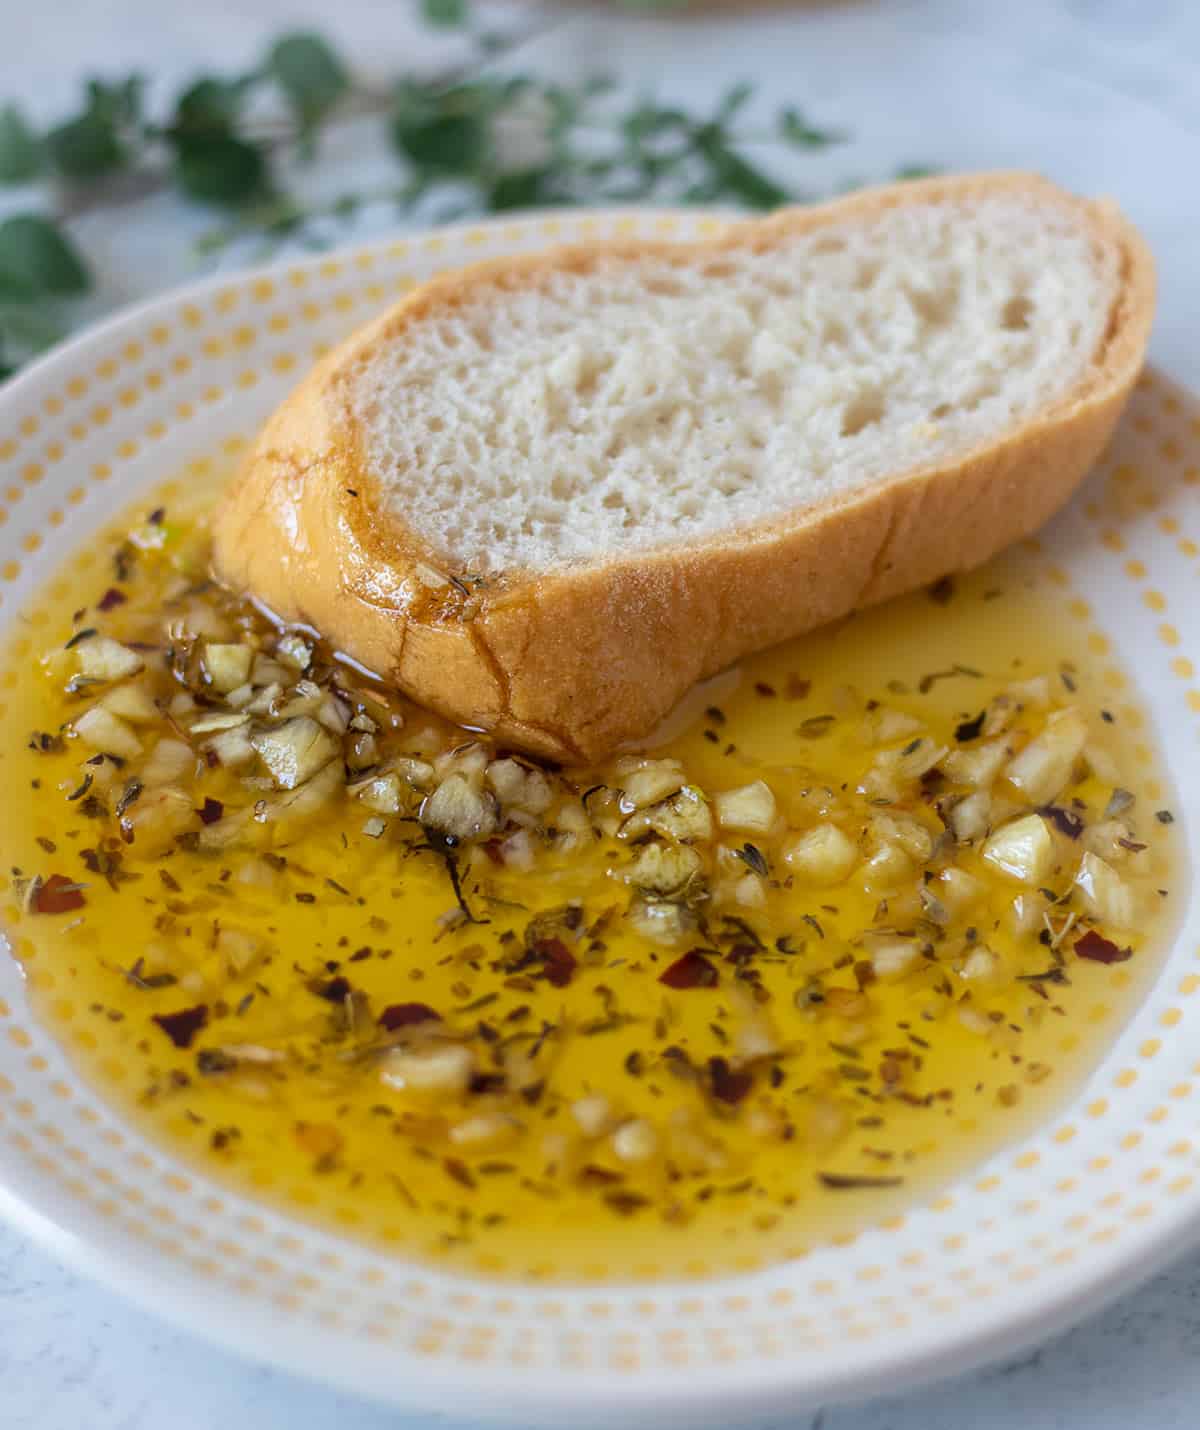 garlic bread dipping oil on a white and yellow plate with a slice of bread and fresh oregano in the background.